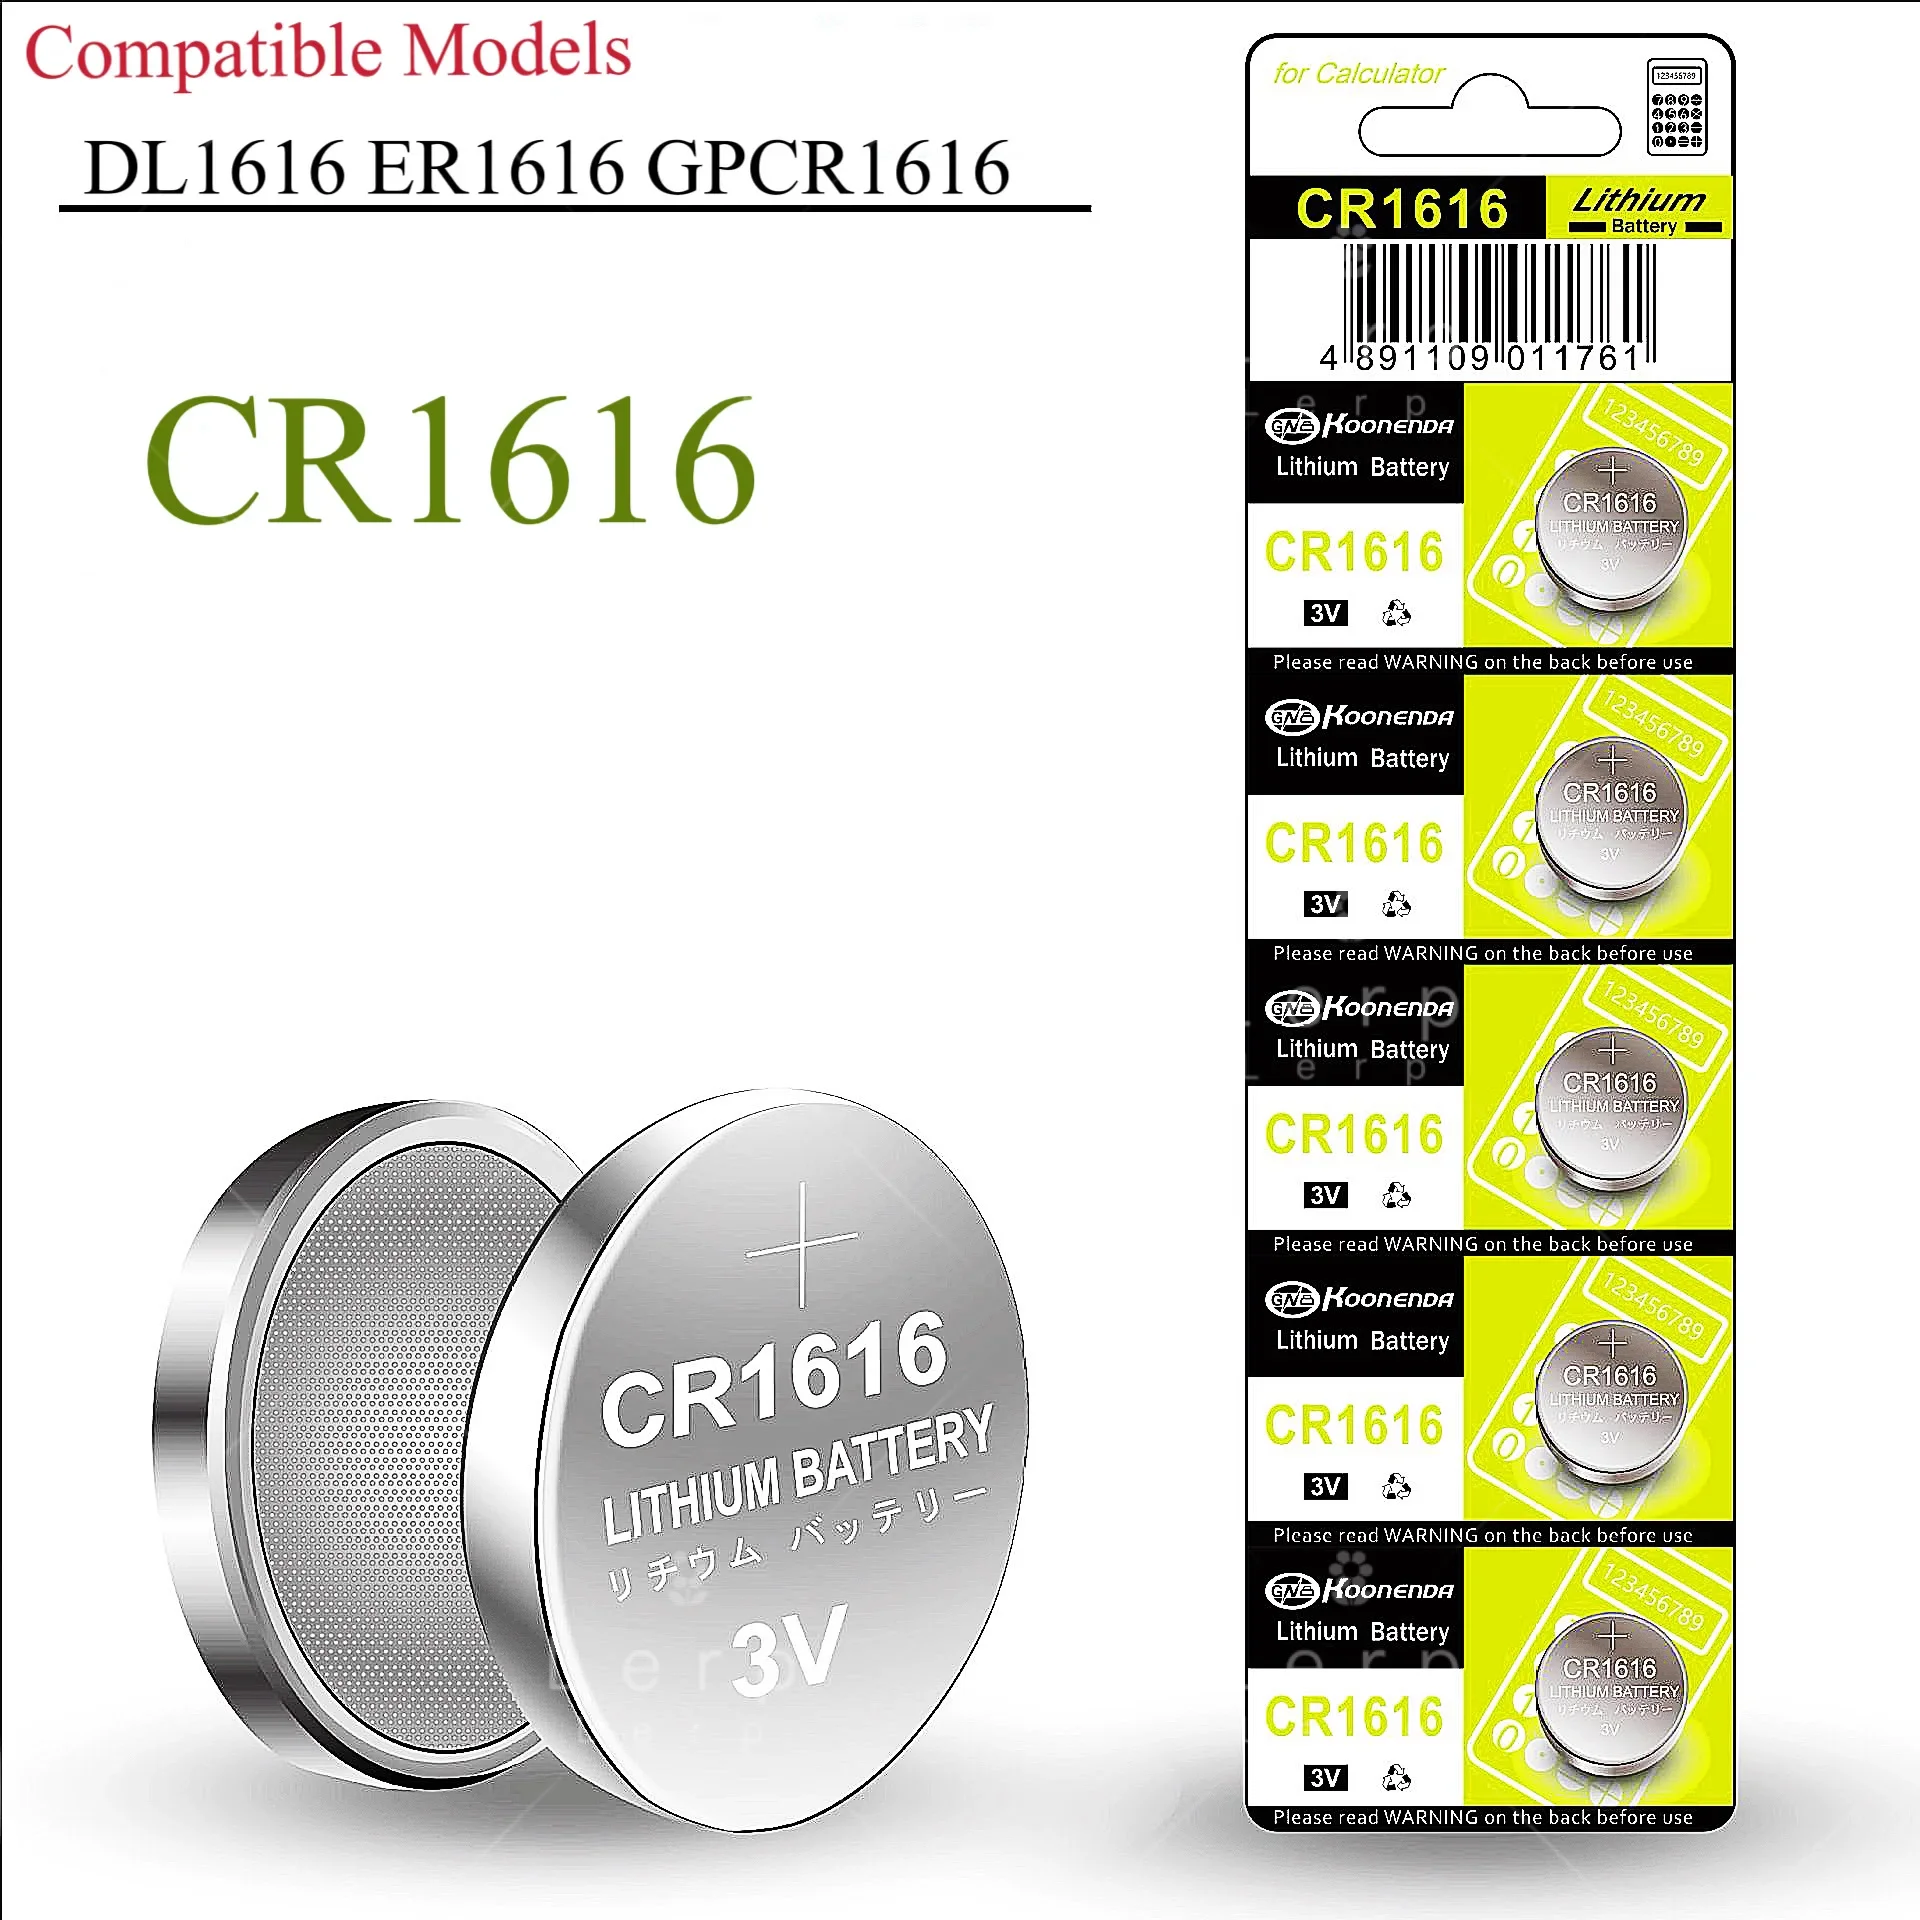 

CR1616 3V button battery, suitable for Dongfeng Honda CRV Mazda, electric vehicle keys, remote controls, watches, scales, etc